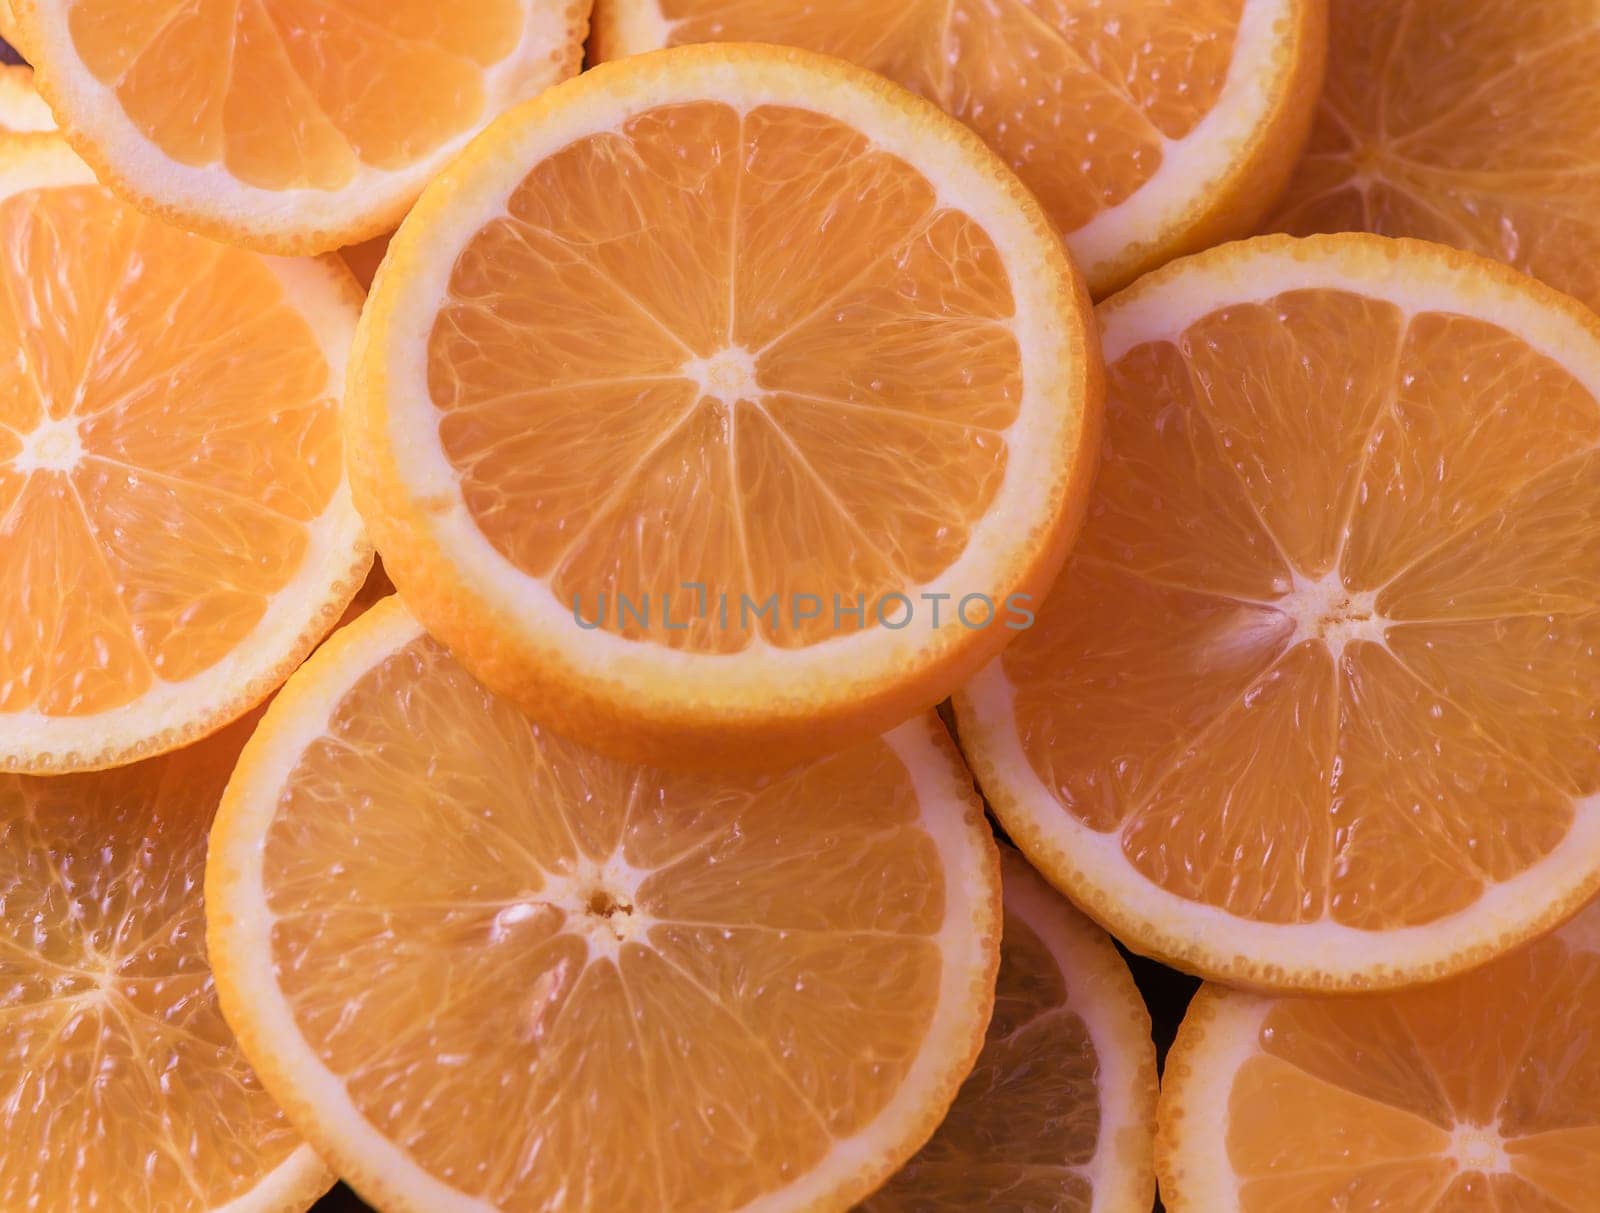 oranges cut into slices and laid out on the table as a food background 2